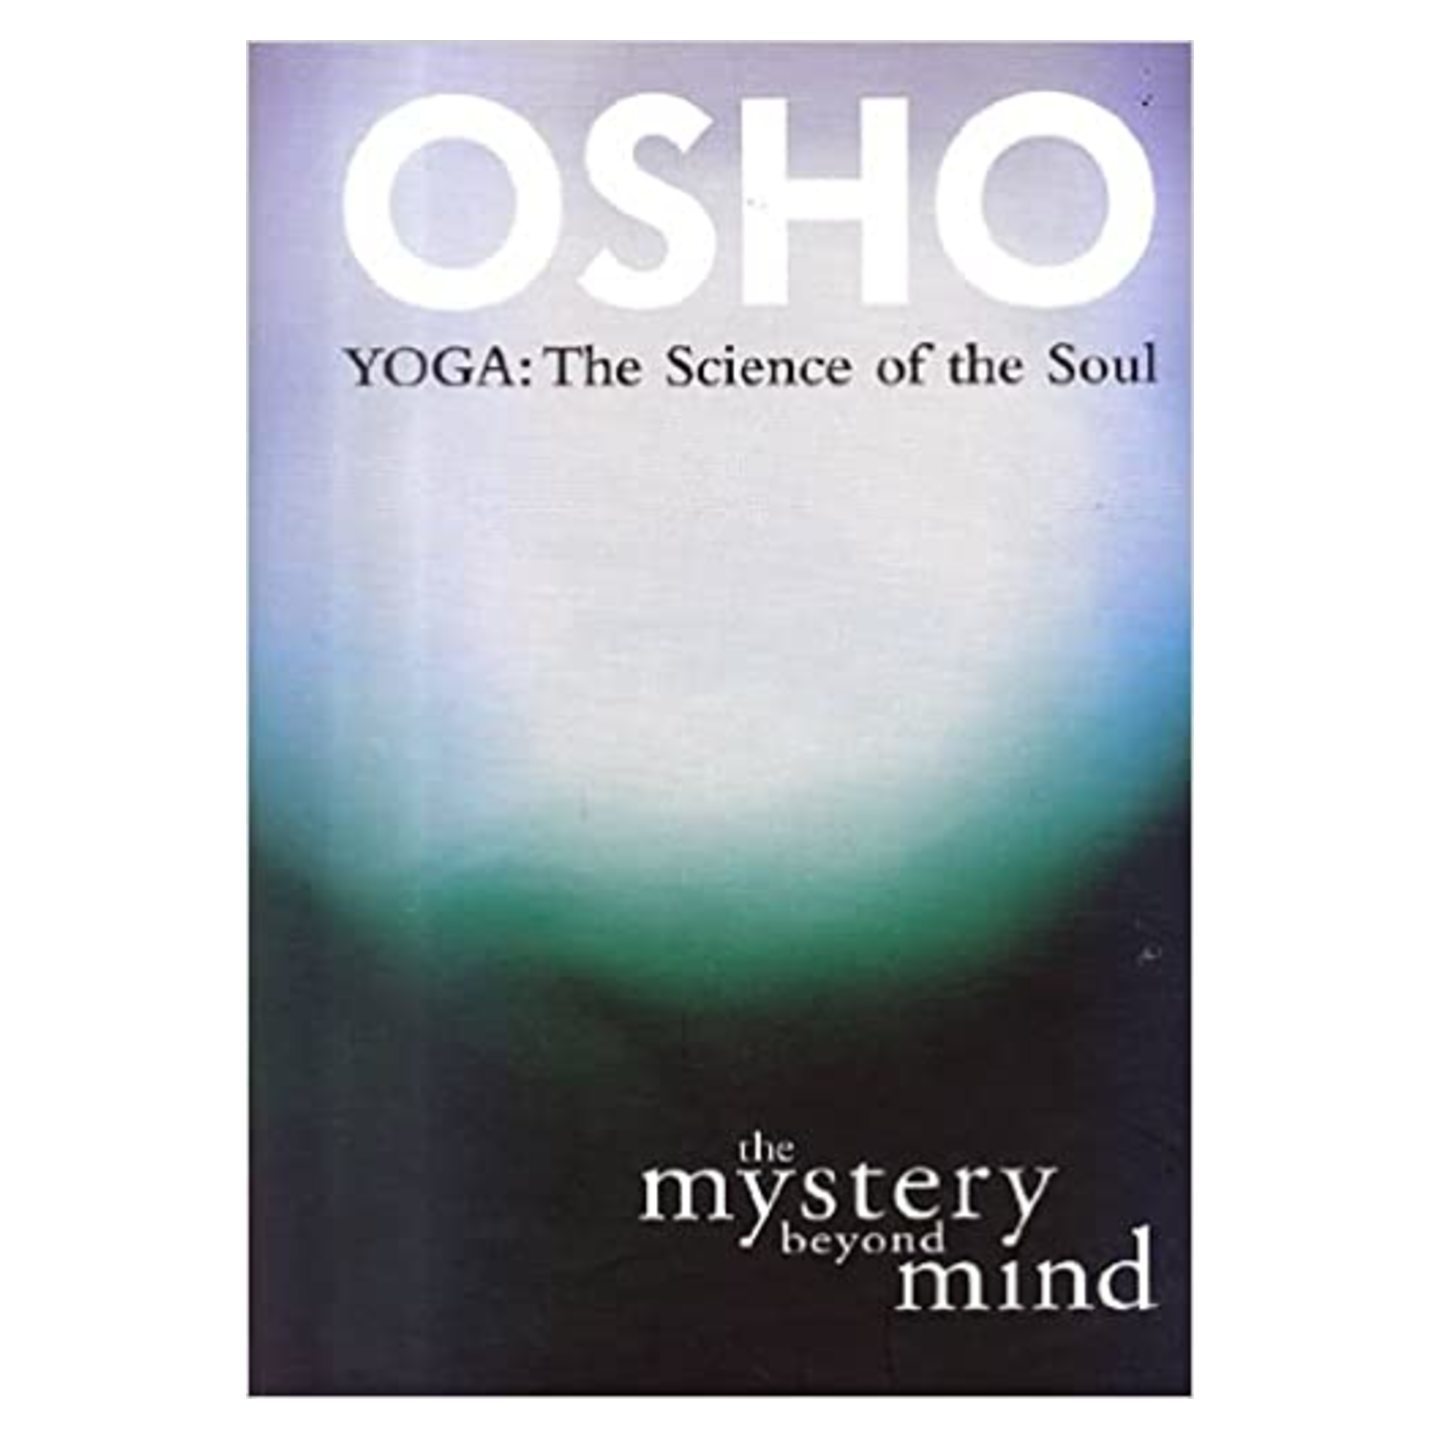 The Mystery Beyond Mind - Yoga The Science of the soul